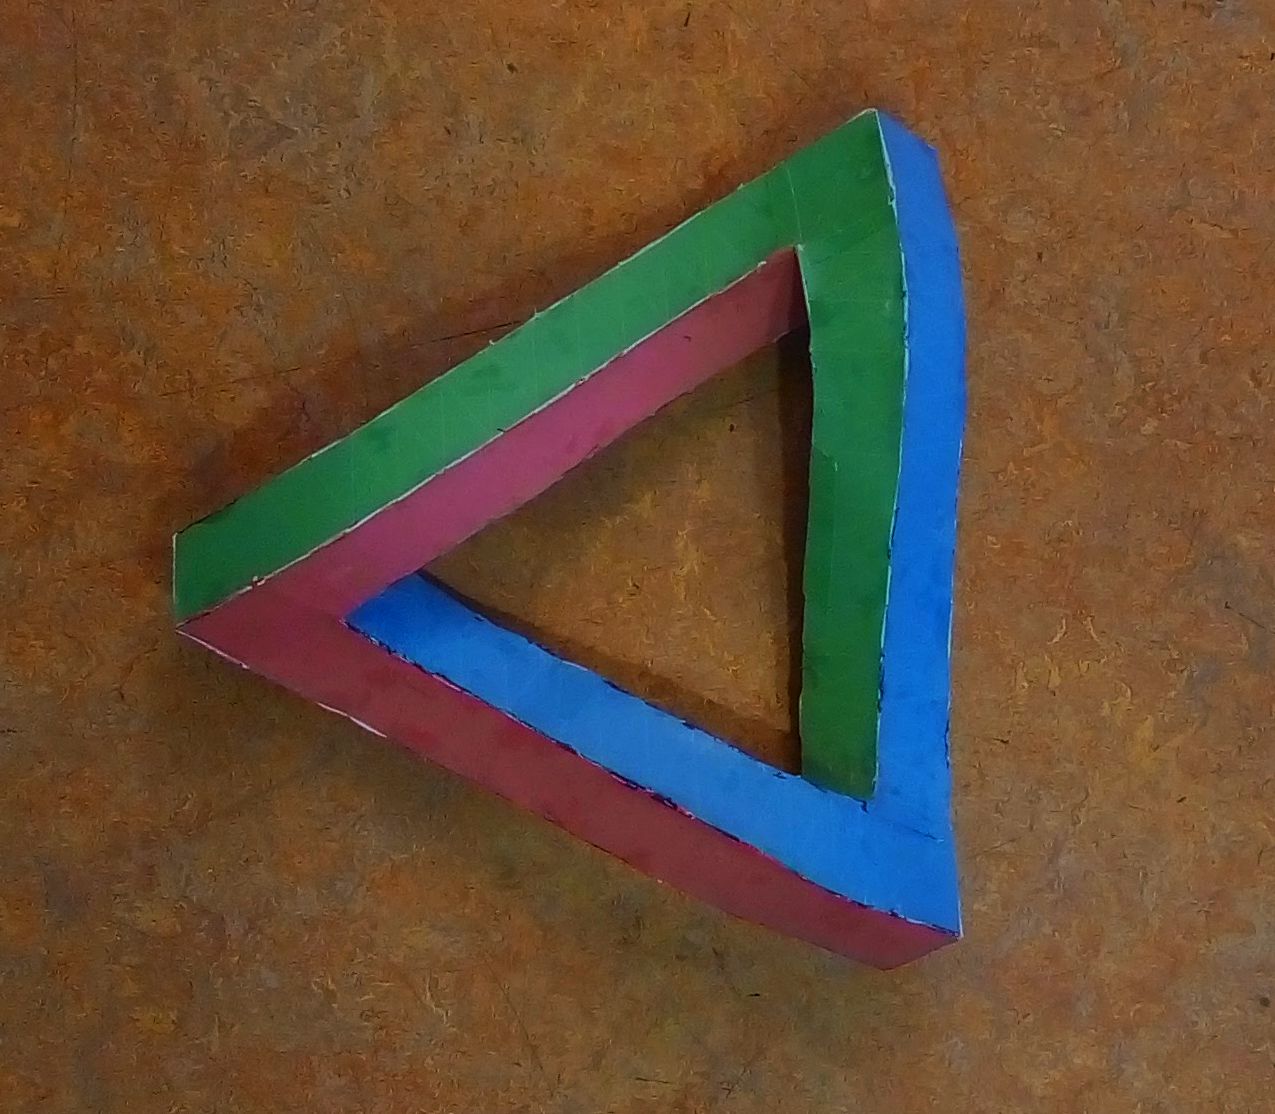 Cardboard model of Penrose impossible triangle